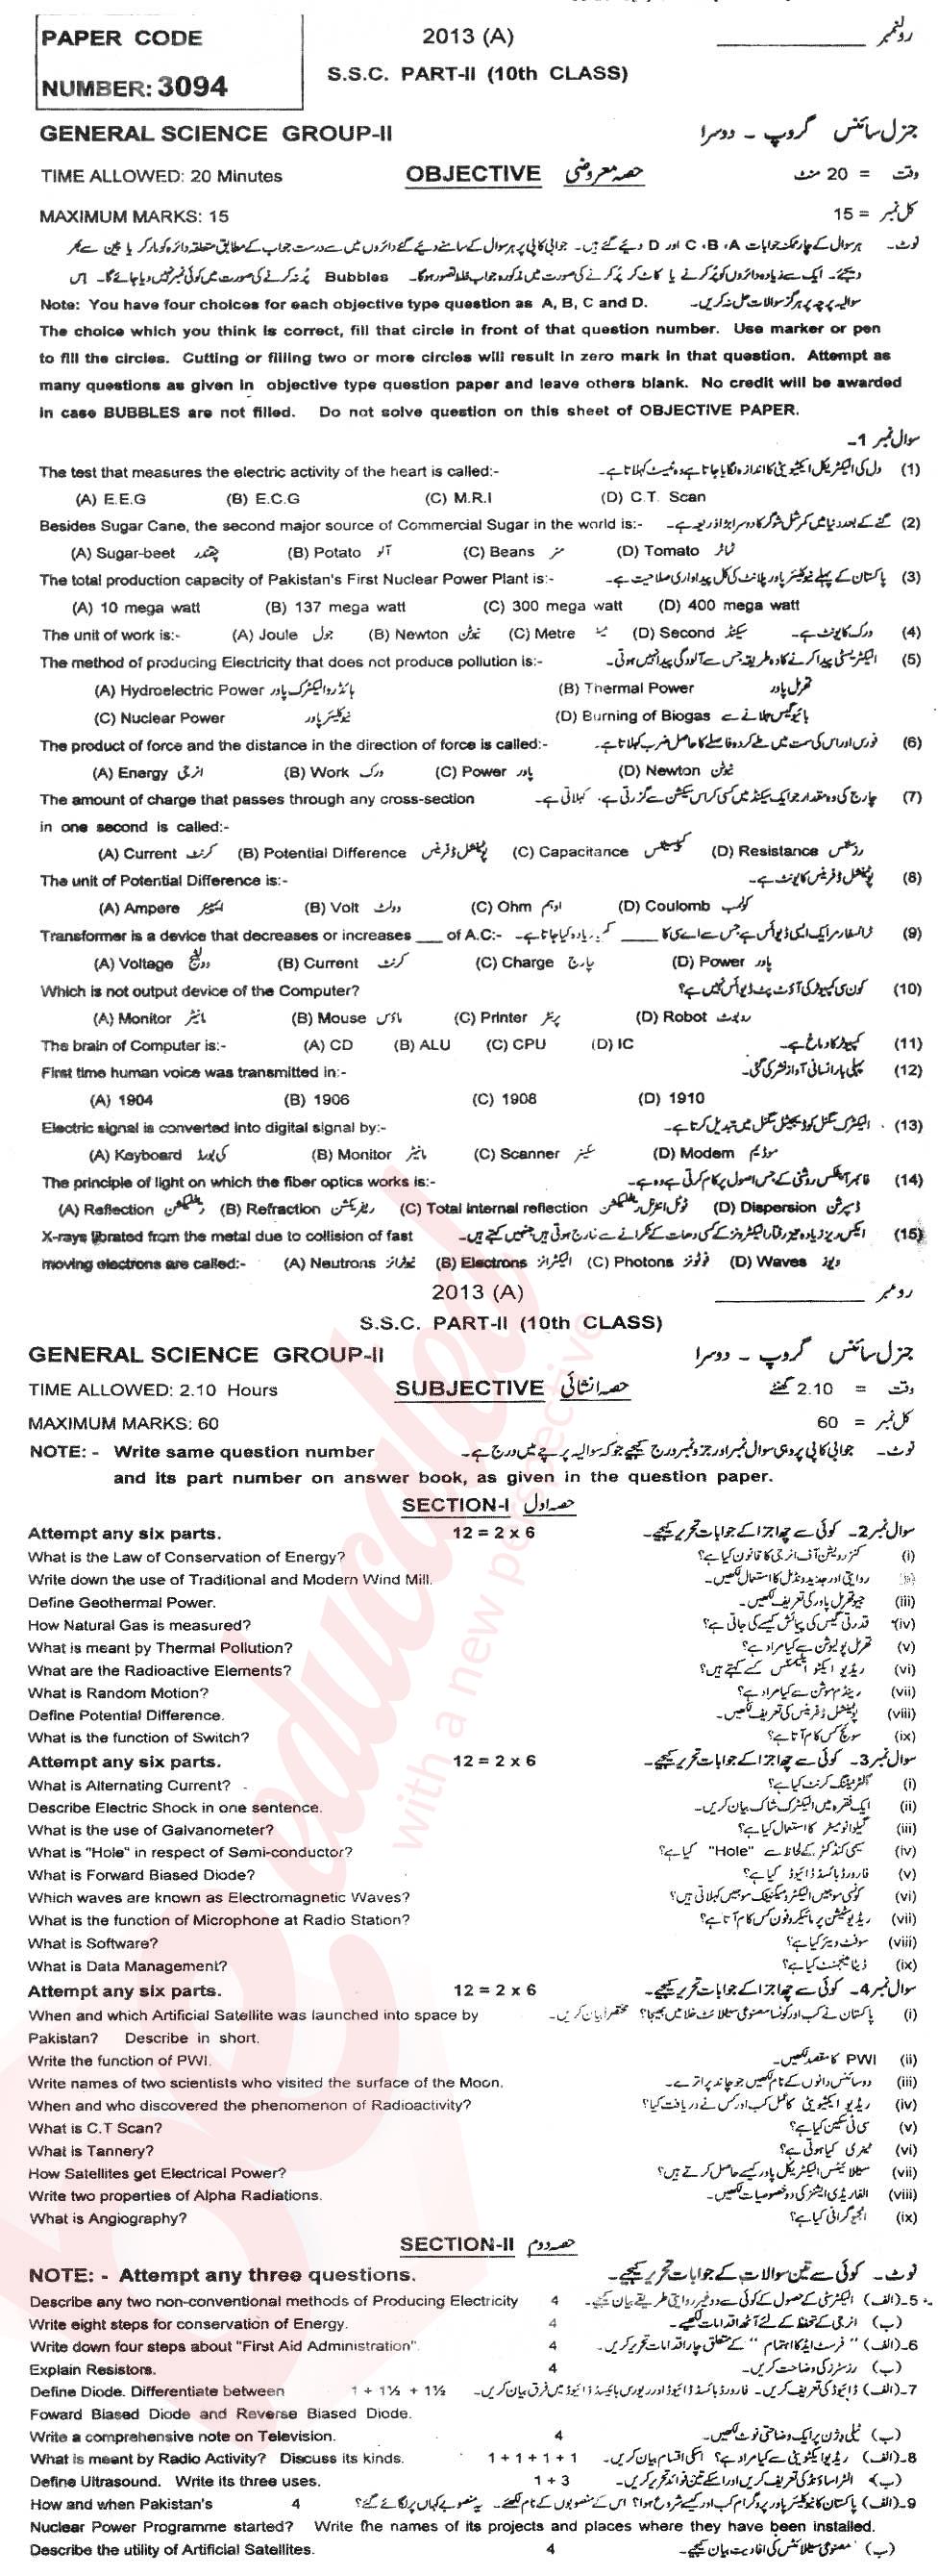 General Science 10th class Past Paper Group 2 BISE Multan 2013